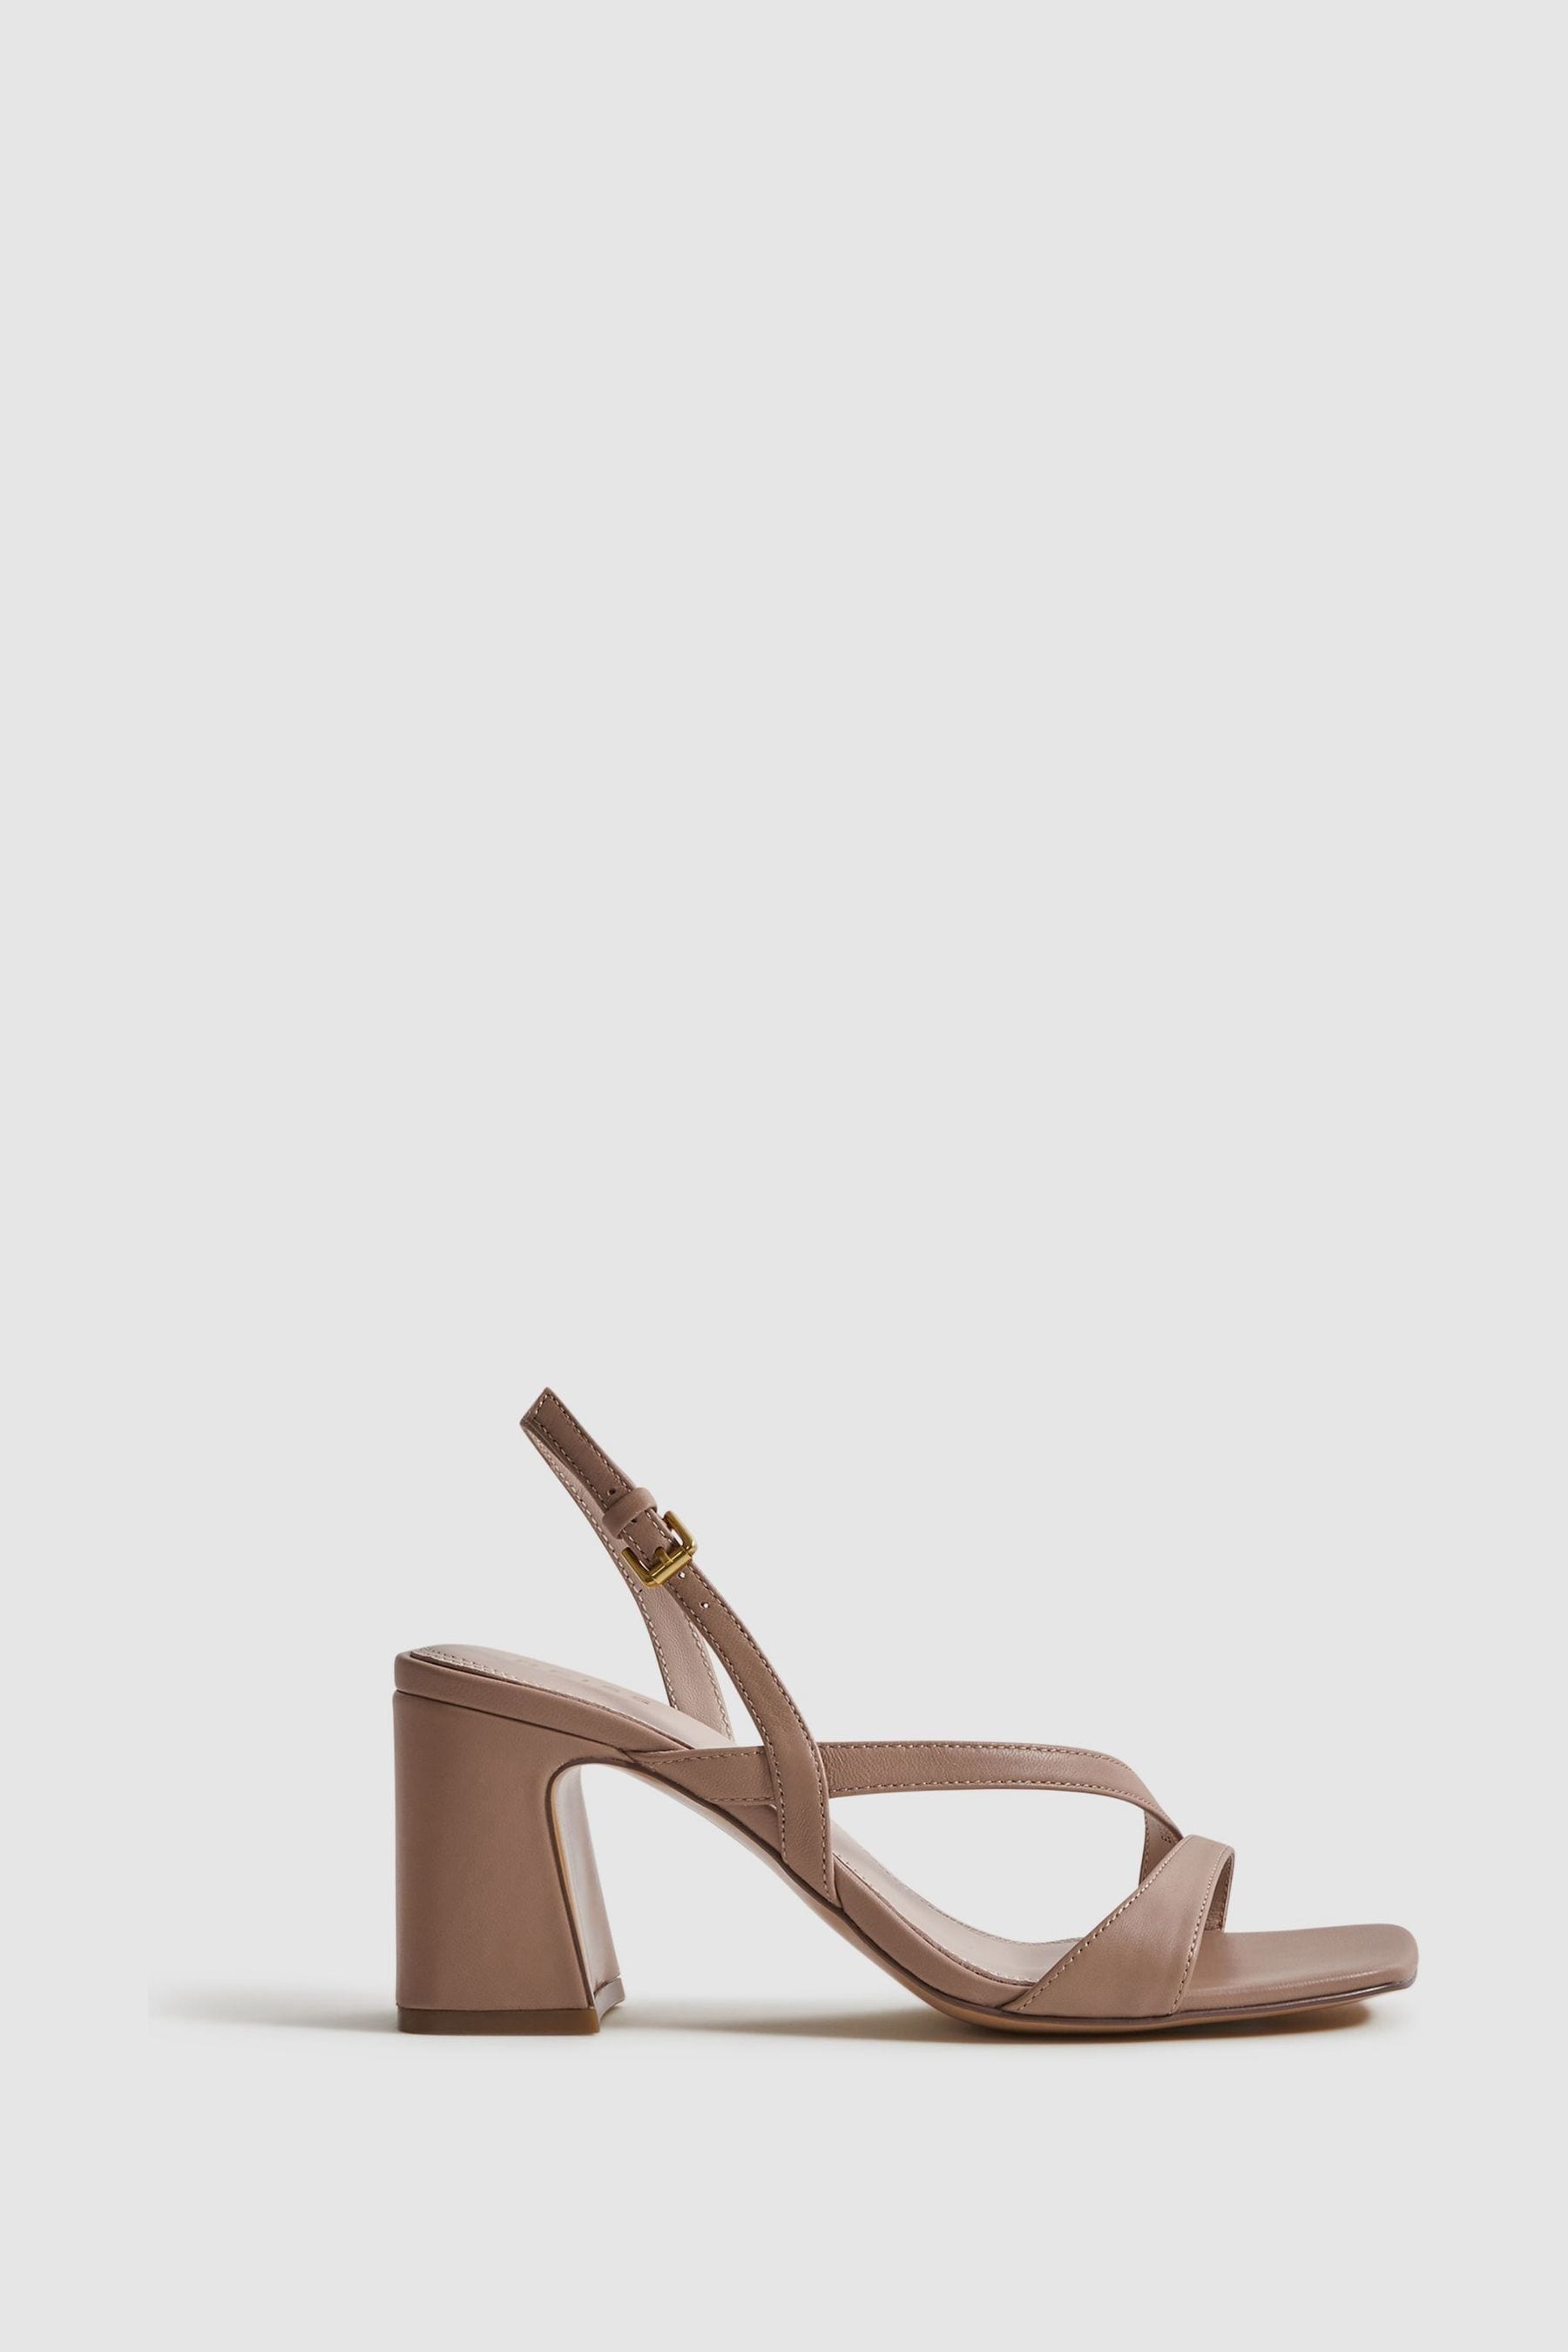 Reiss Alice - Nude Strappy Leather Heeled Sandals, Uk 3 Eu 36